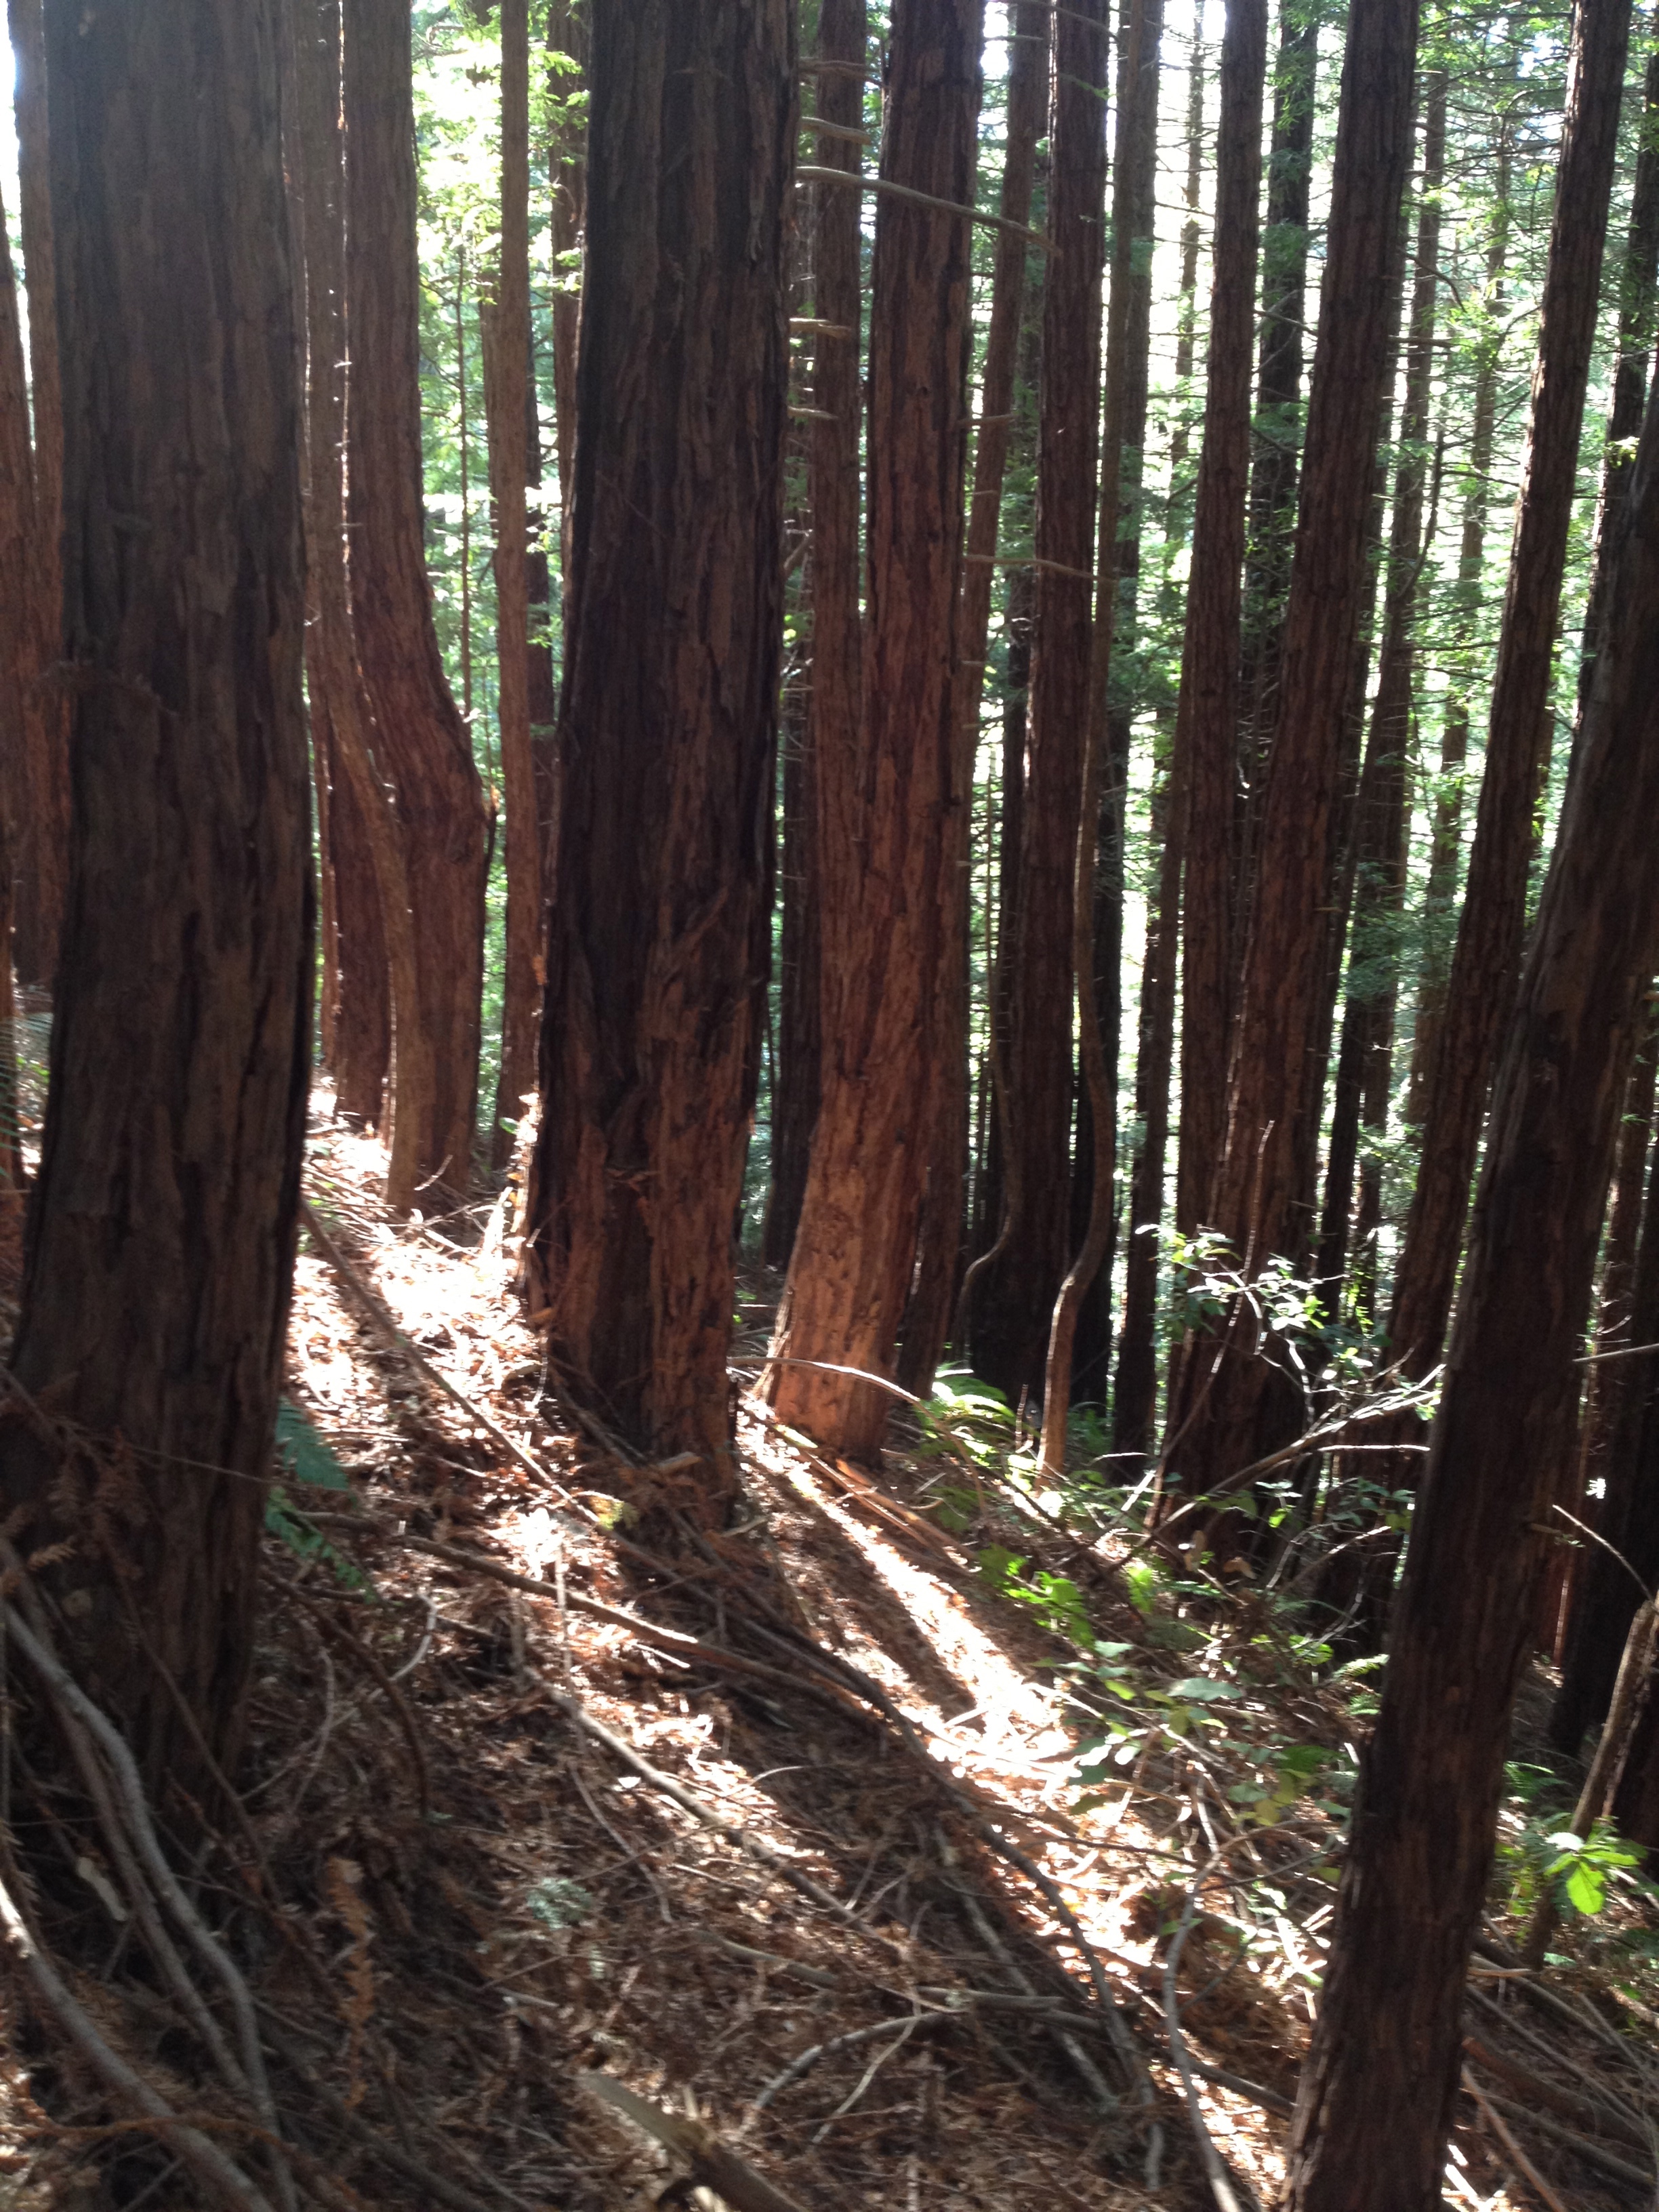 Redwood Trees - Before Editing